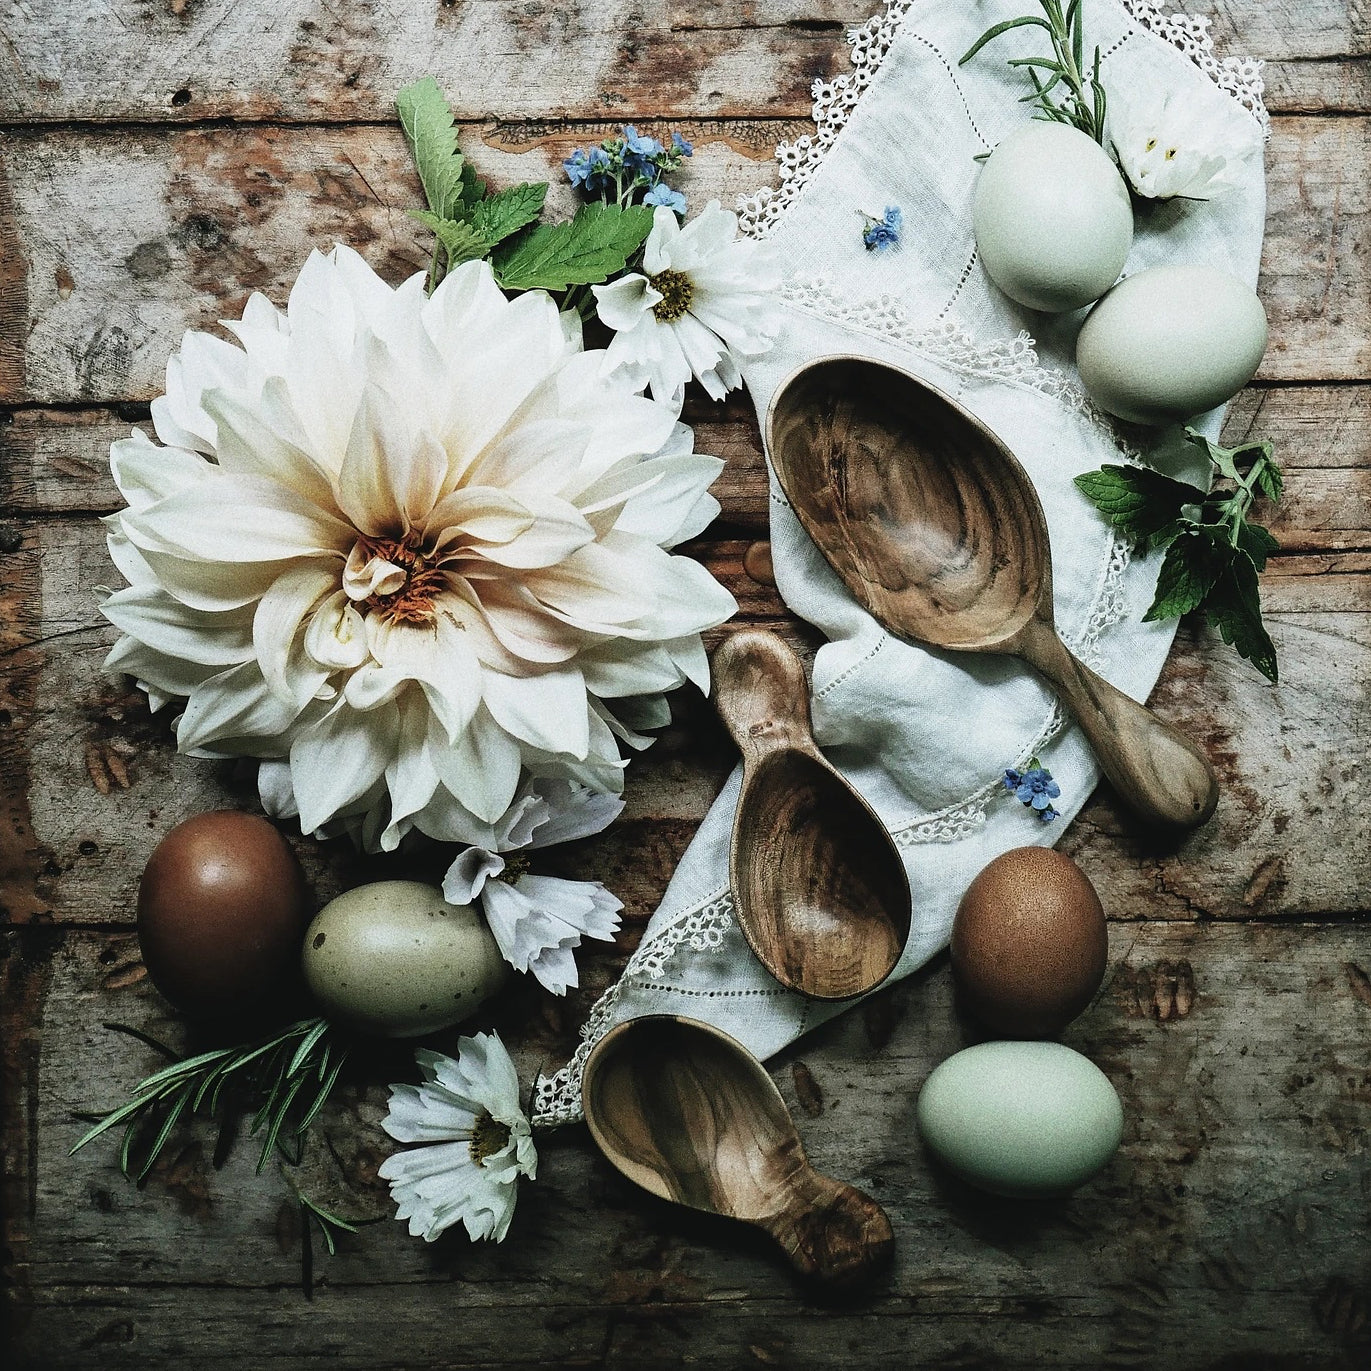 Wooden spoons are arranged on a table with eggs and flowers